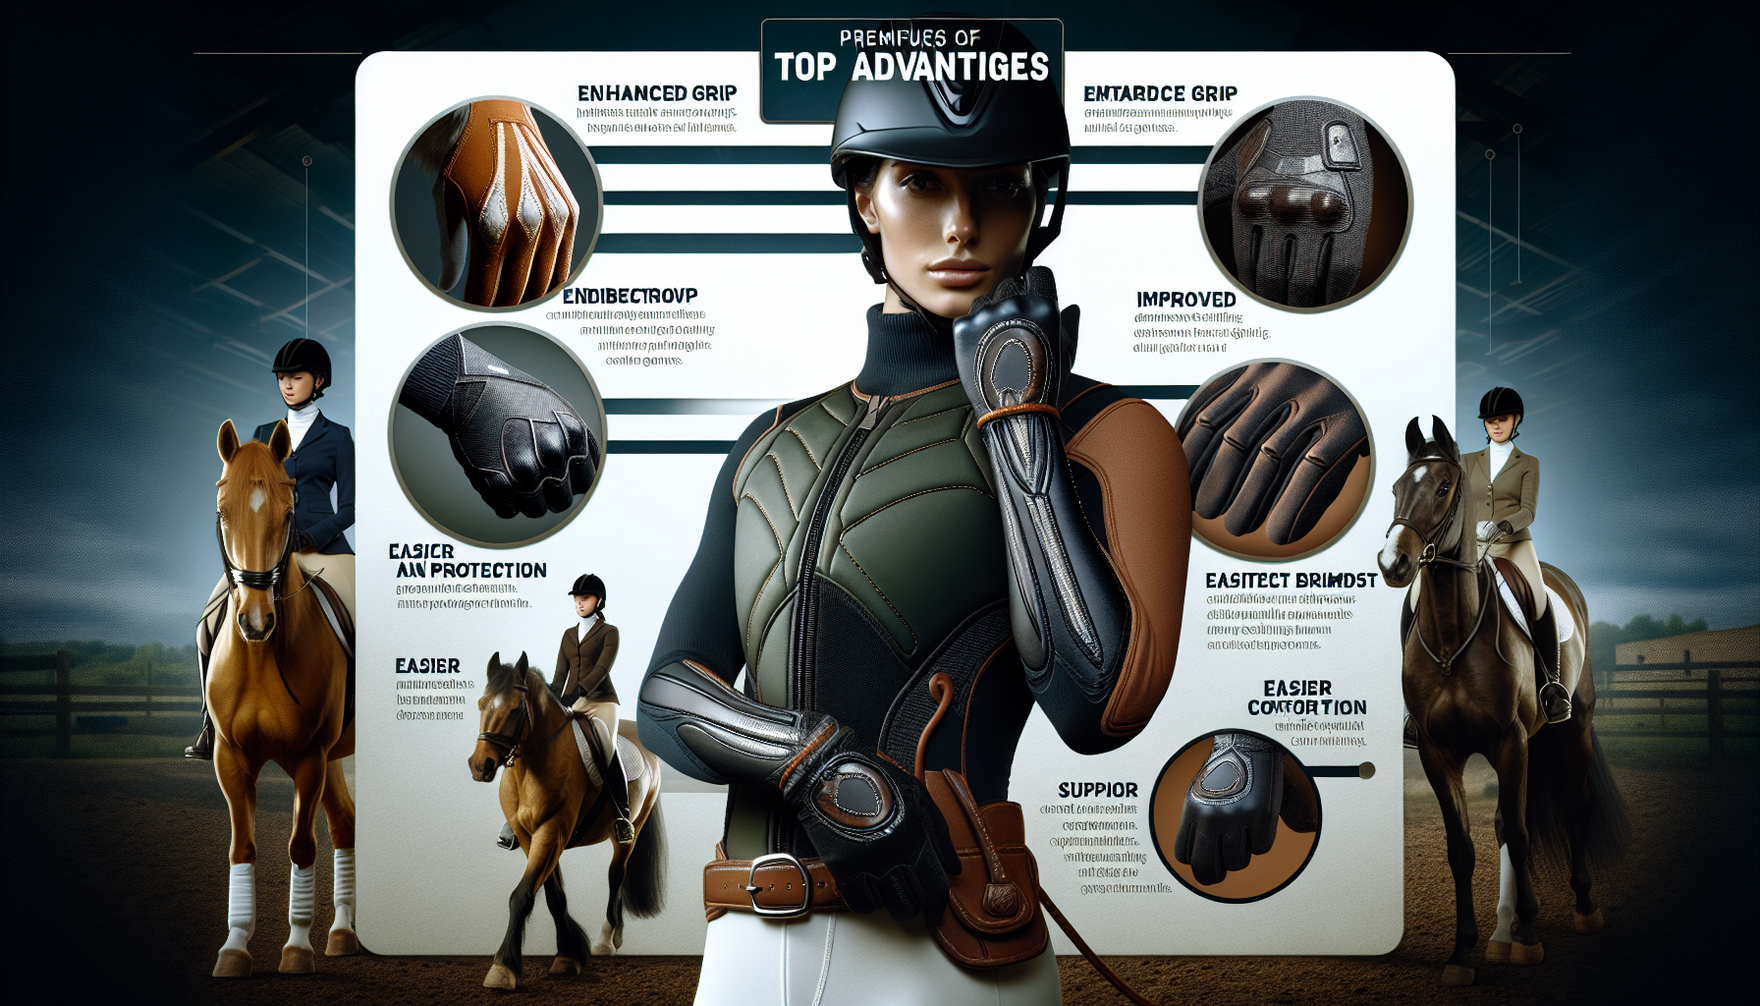 A visual representation displaying the top advantages of premium equestrian gloves. The image is divided into various sections, each highlighting a different advantage. These sections may include imag